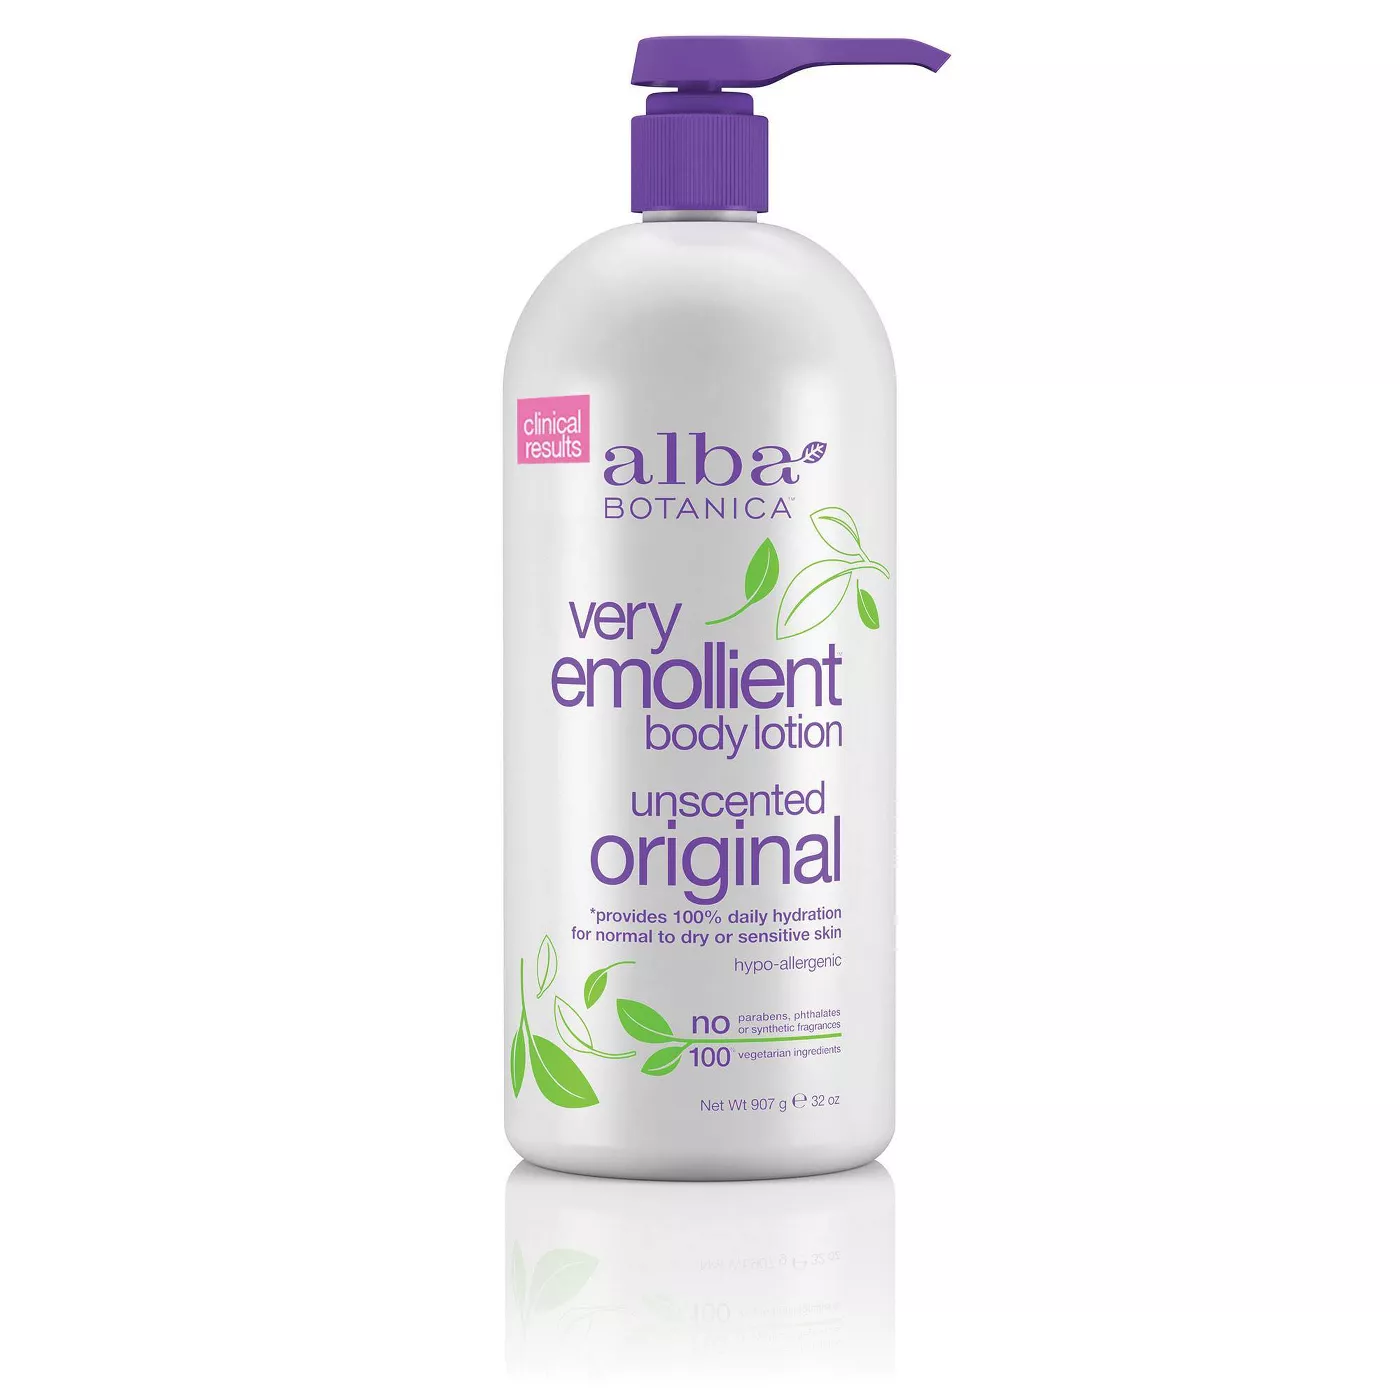 Unscented Alba Very Emollient Body Lotion - Unscented Original- 32oz - image 1 of 3